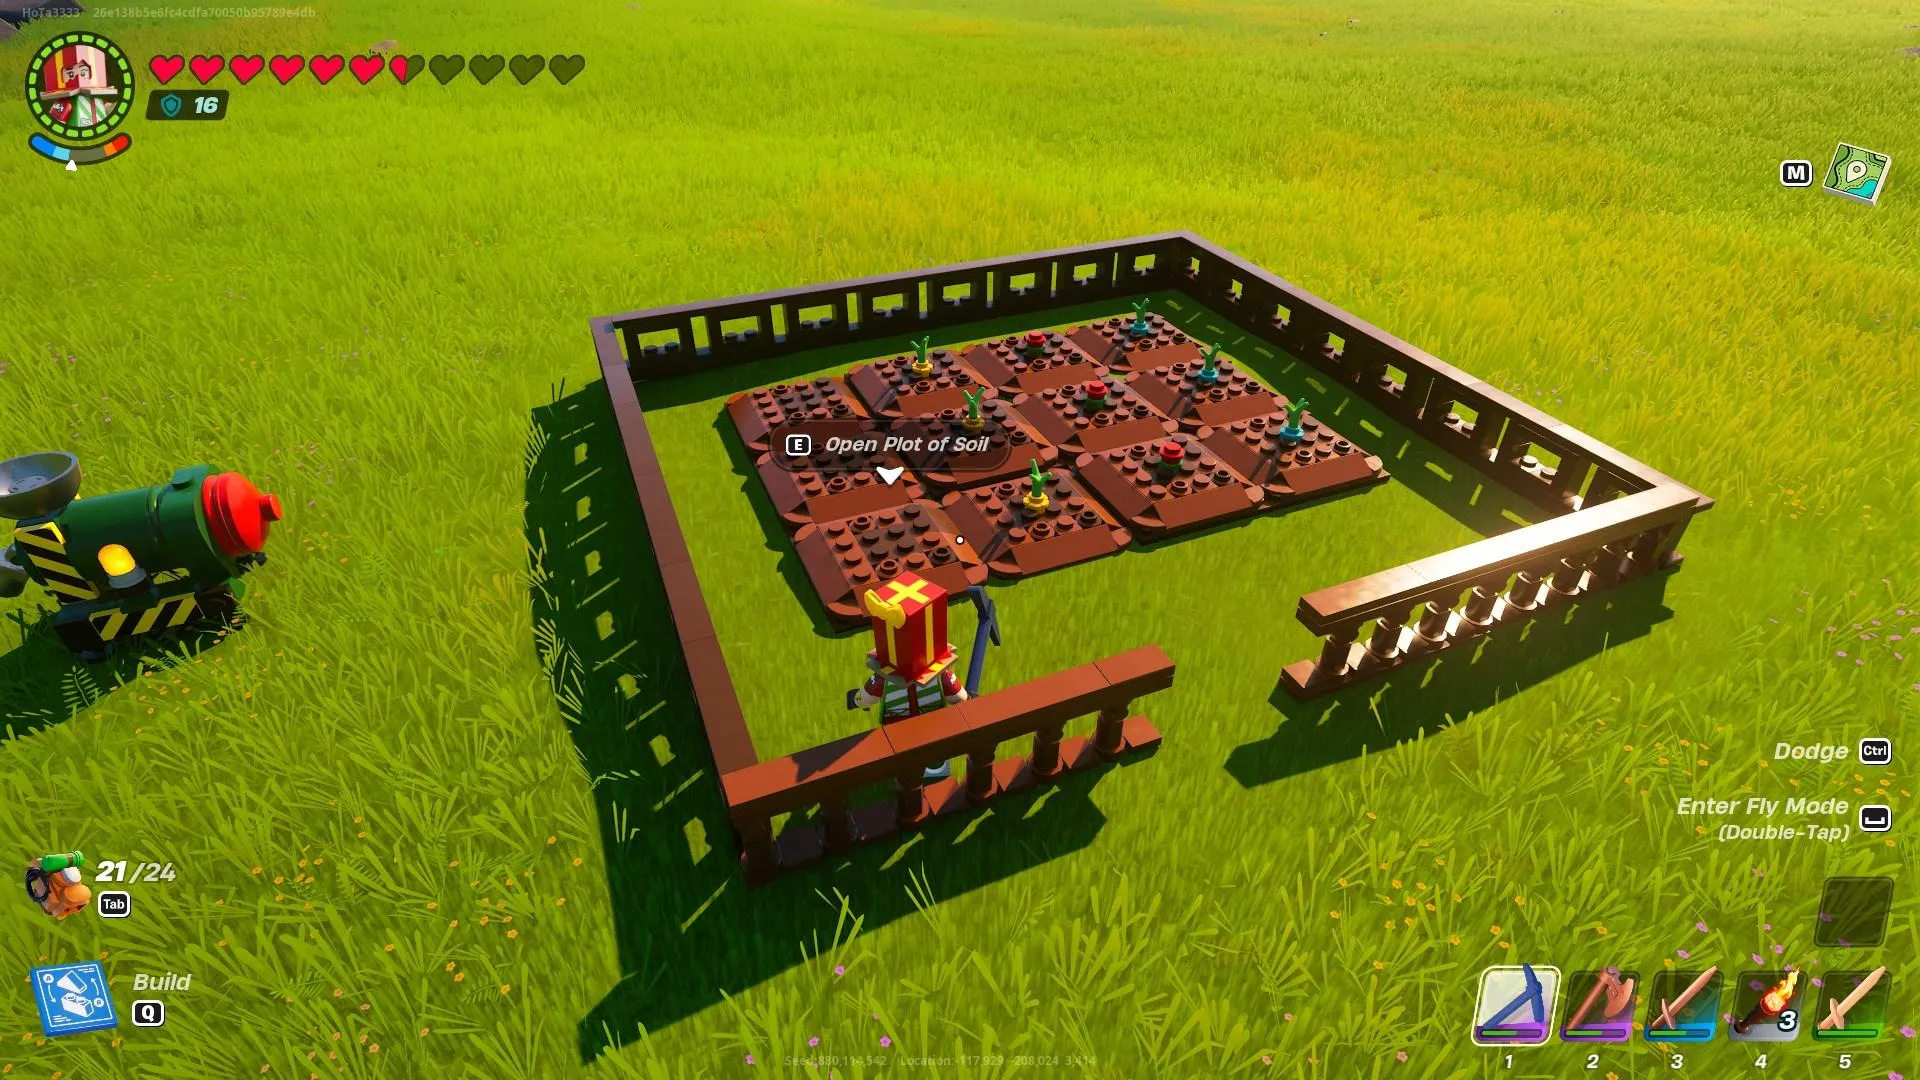 How To Make A Garden in LEGO Fortnite